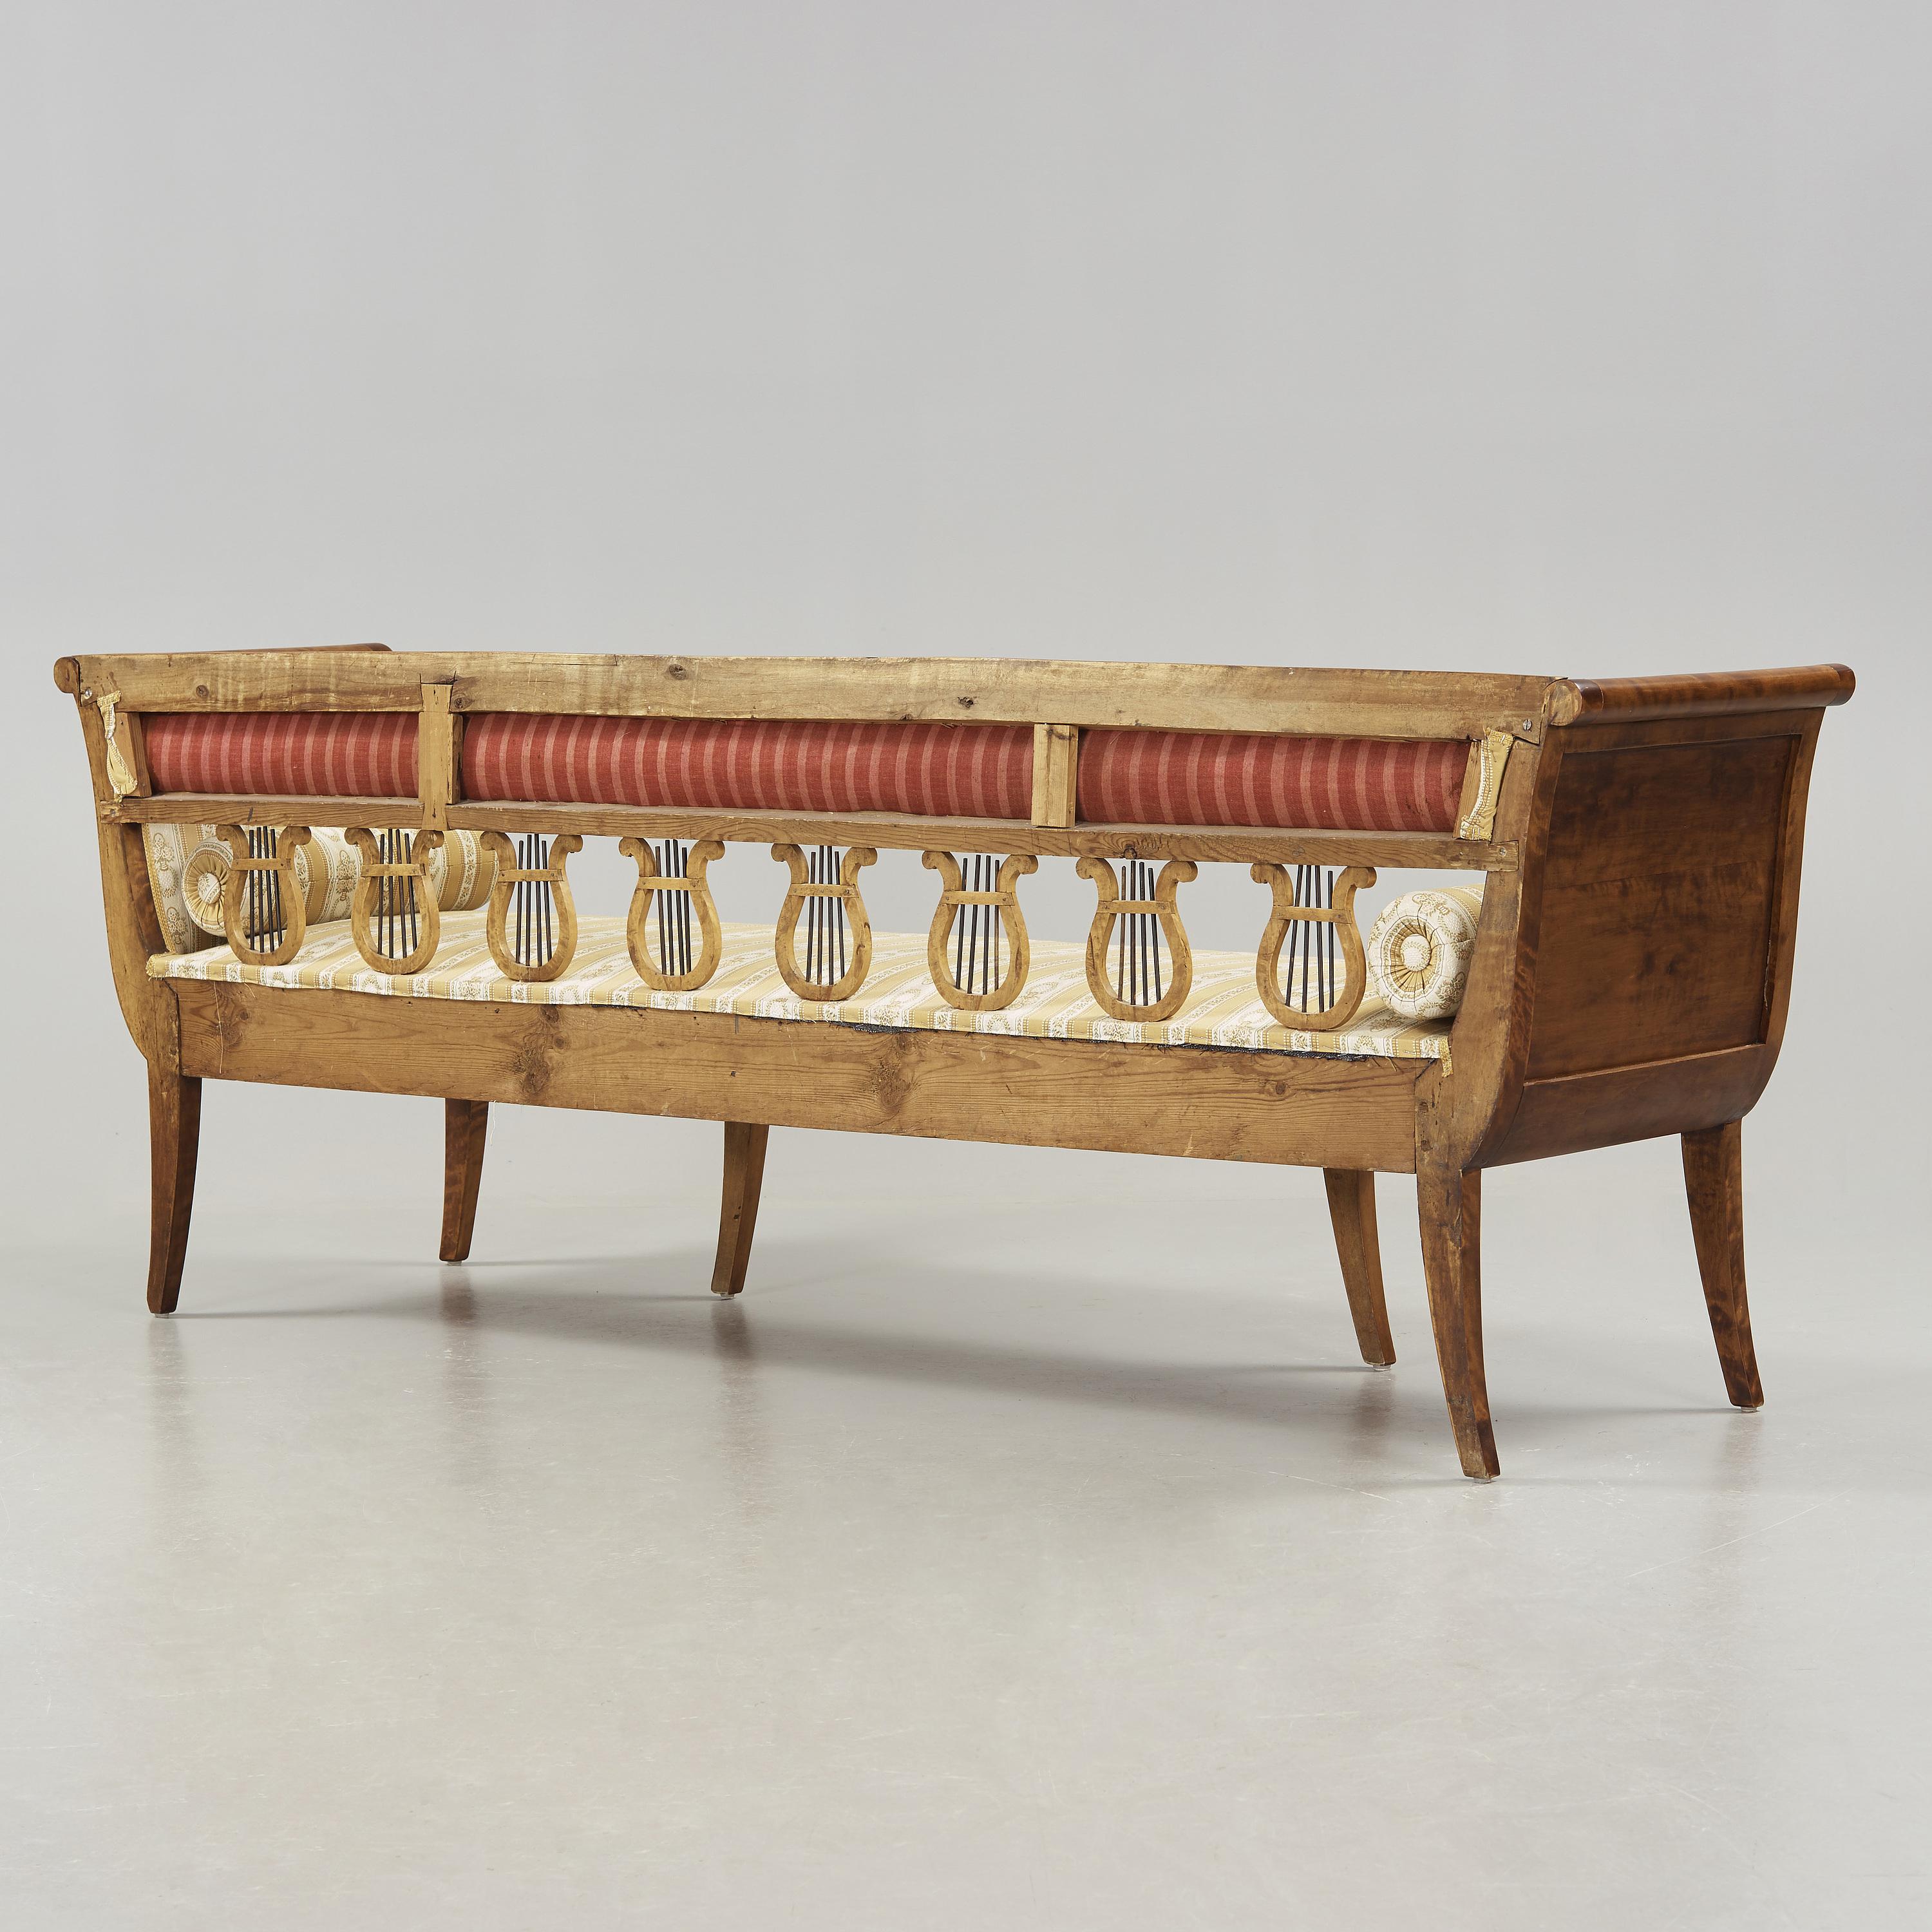 Hand-Crafted Swedish Classical Sofa For Sale